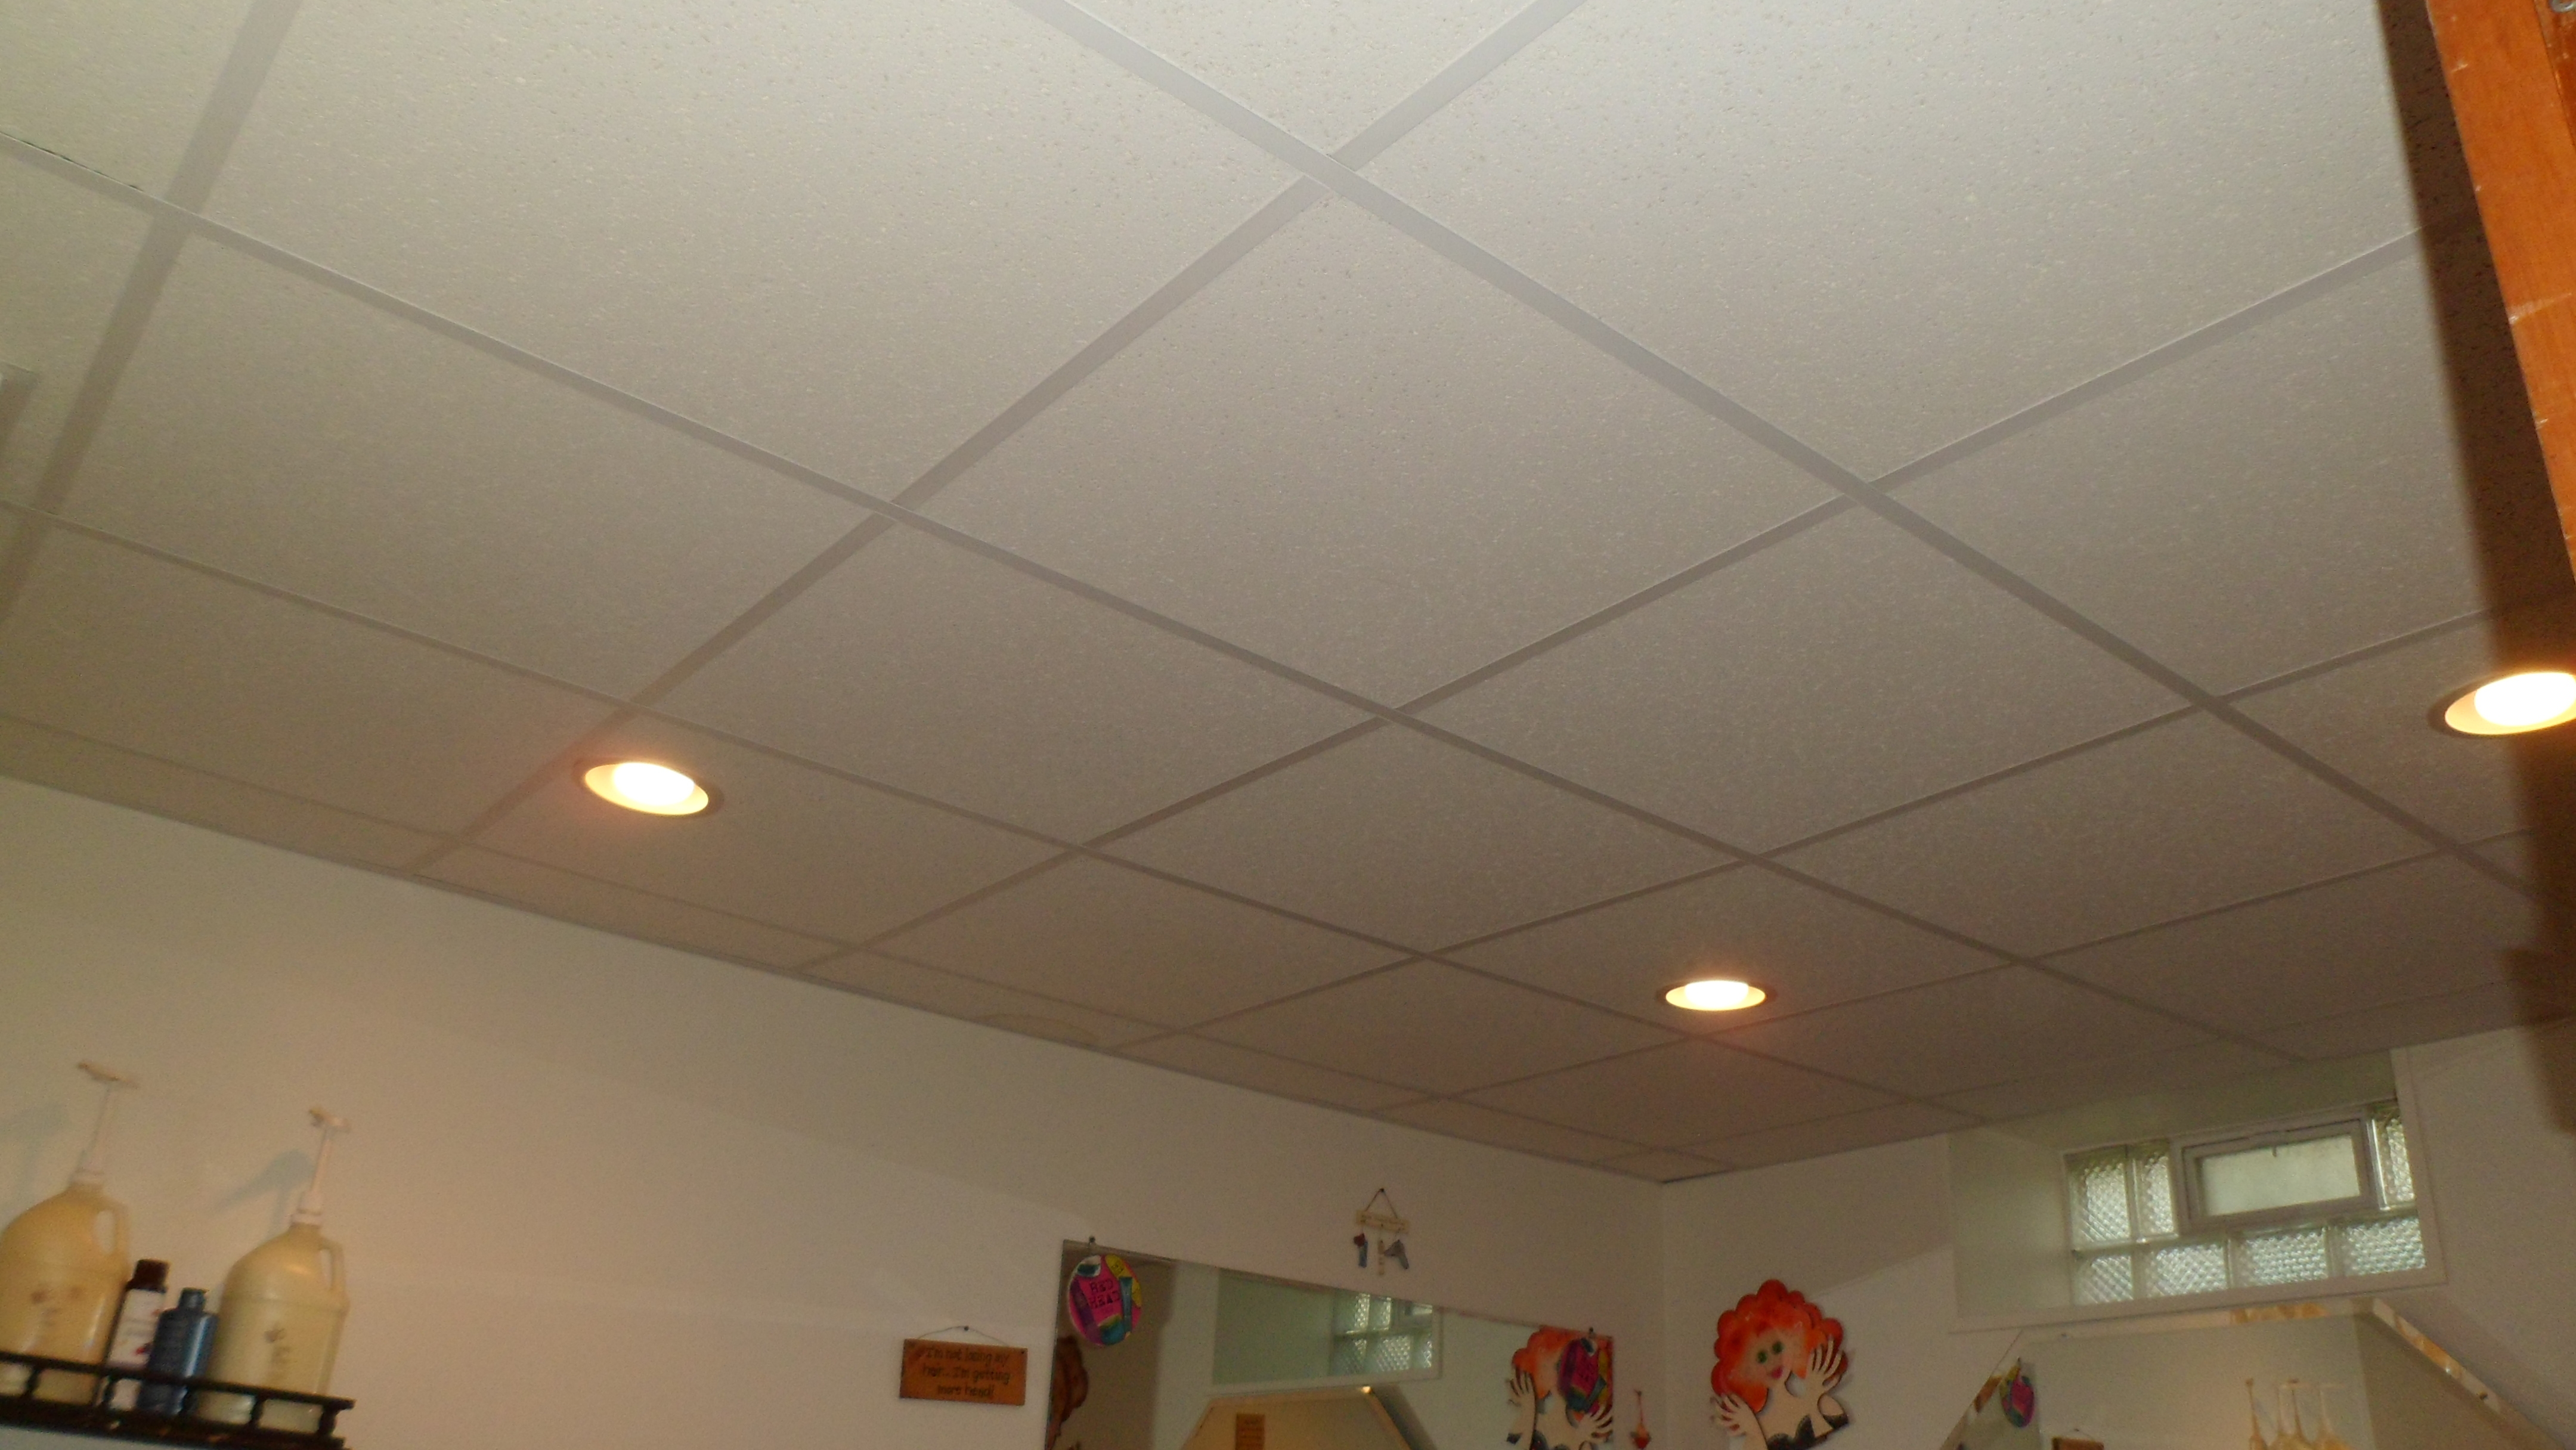 Cutting Ceiling Tiles For Pot Lights